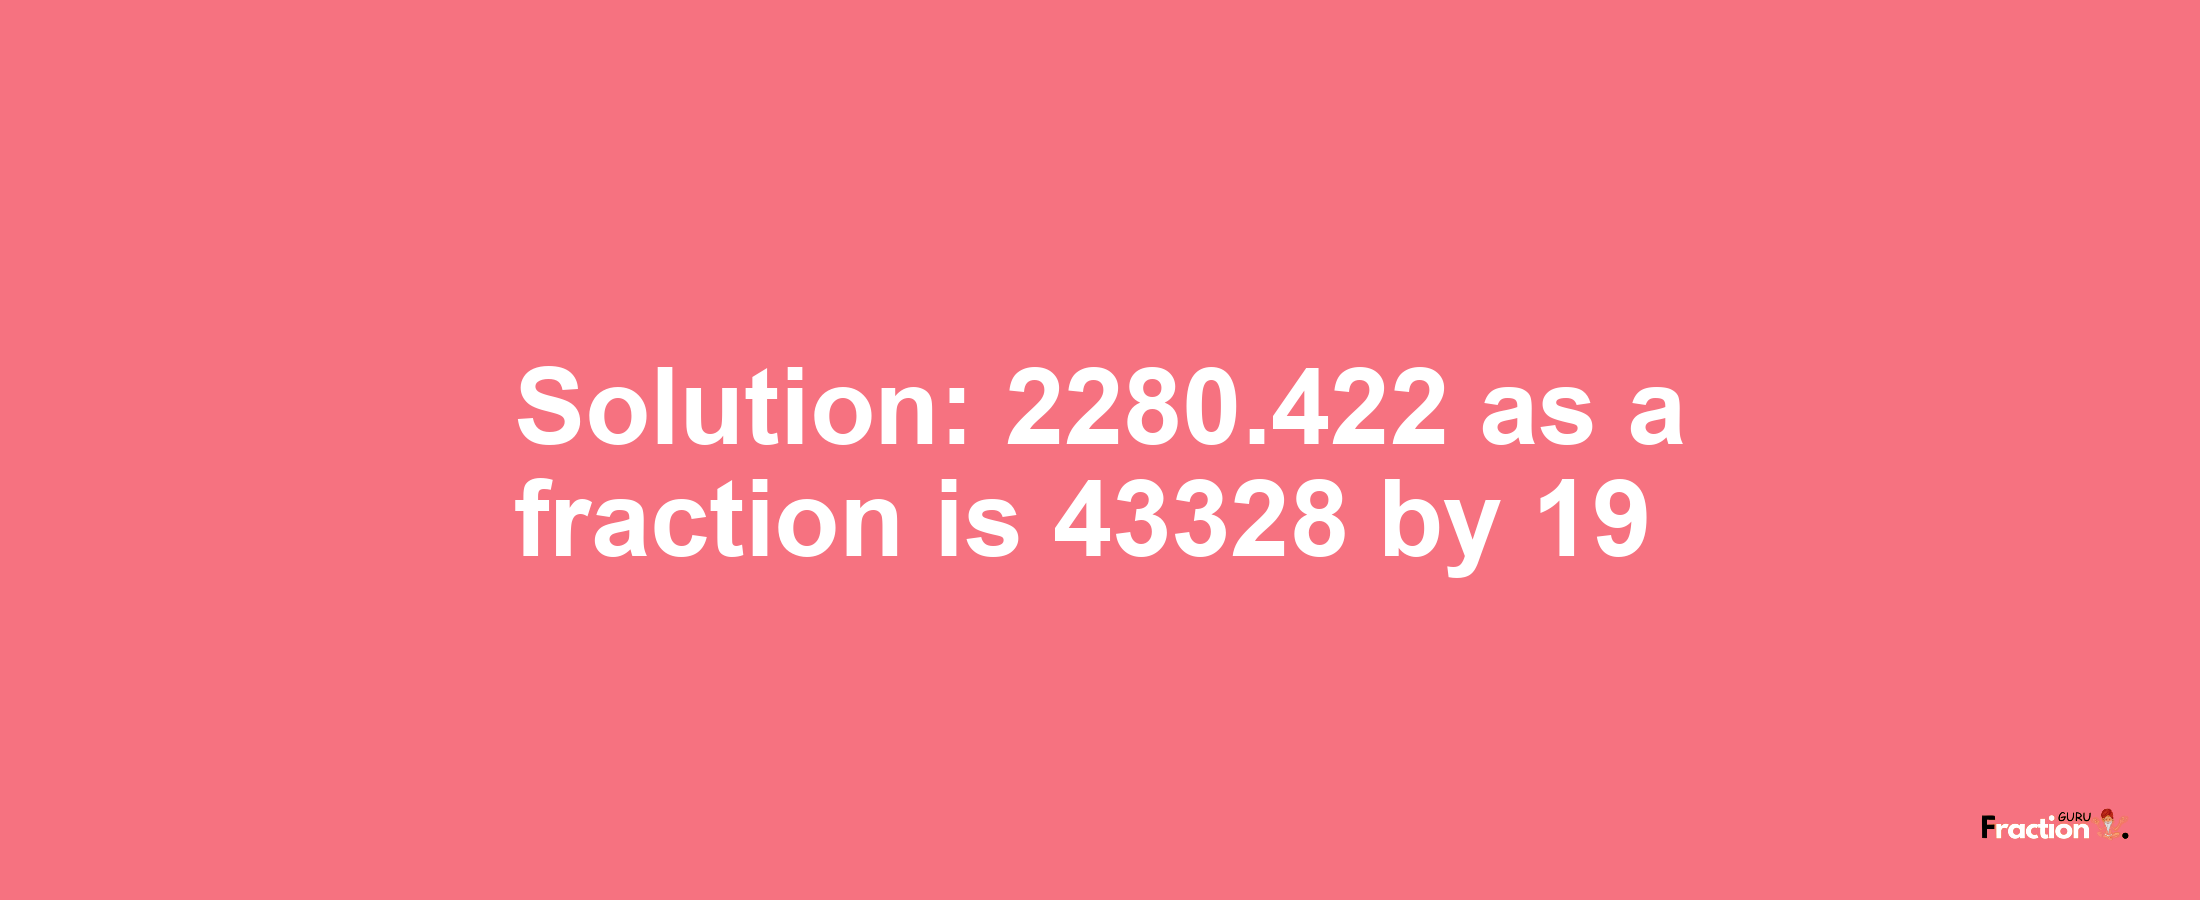 Solution:2280.422 as a fraction is 43328/19